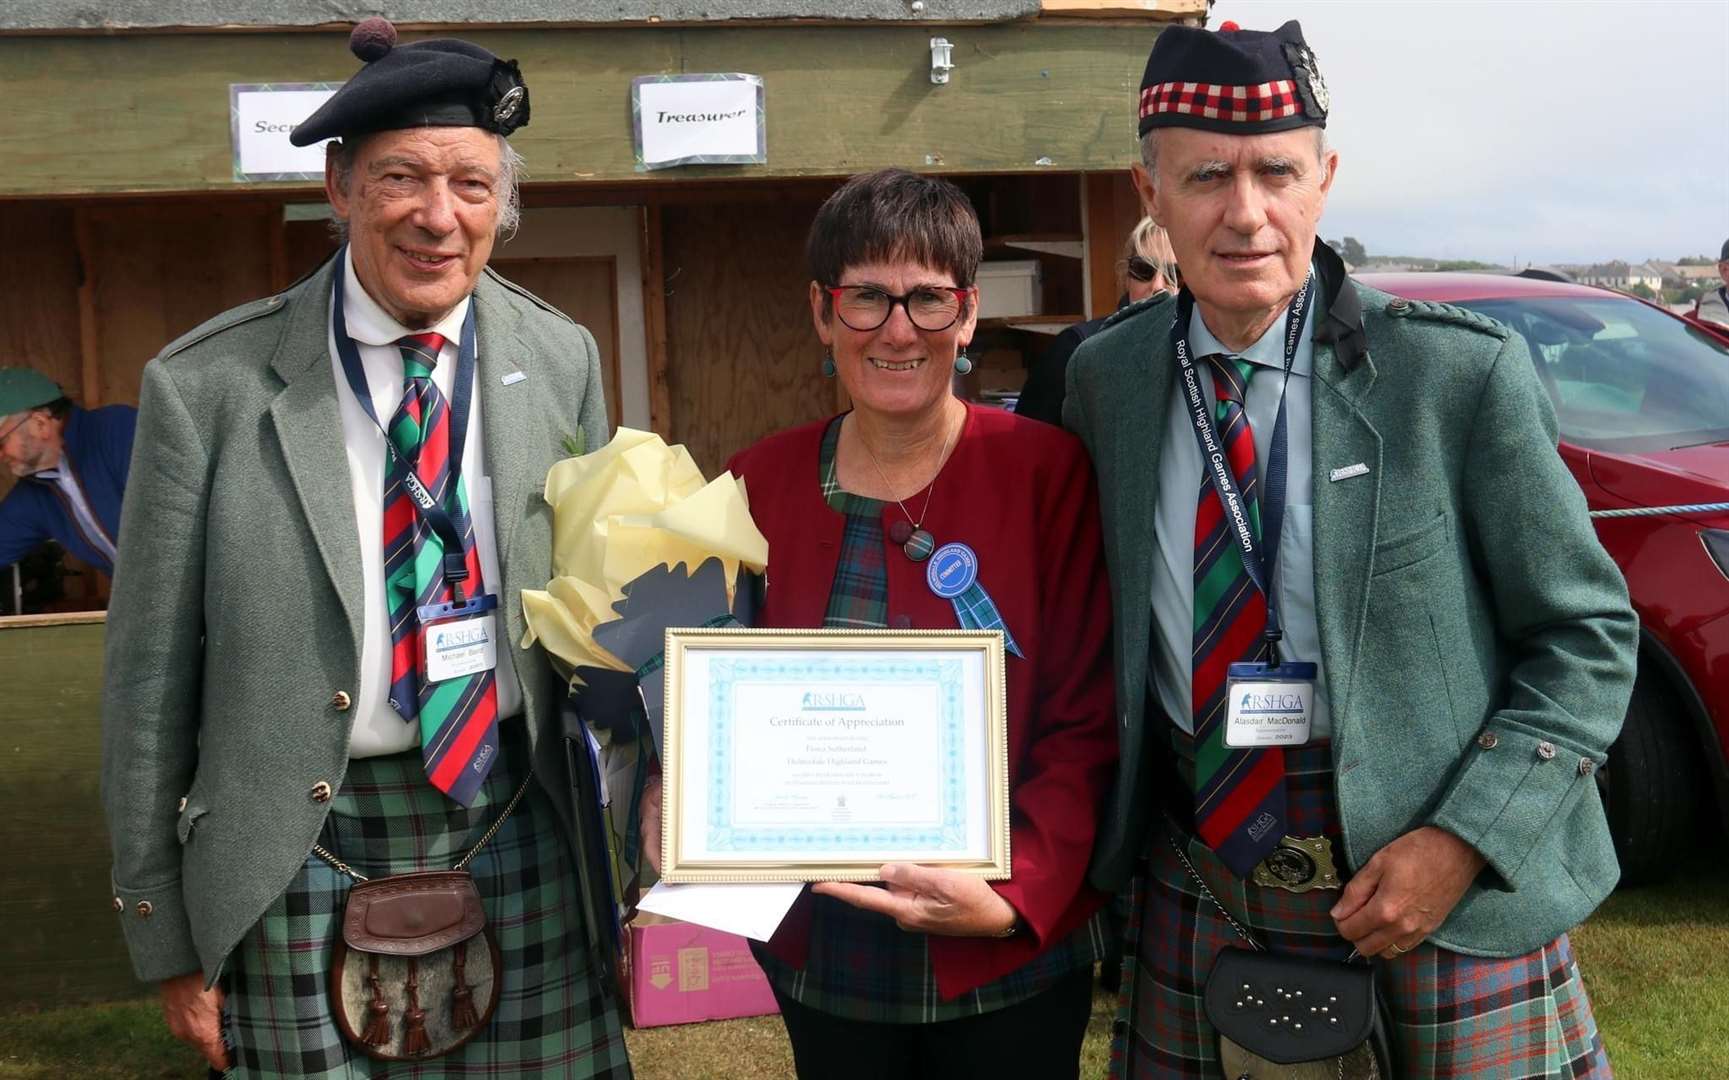 Fiona Sutherland receives her Certificate of Appreciation Award for outstanding long service to the Highland Games. From Michael Baird and Alistair Macdonald, both of the Royal Society Highland Games Association (RSHGA).